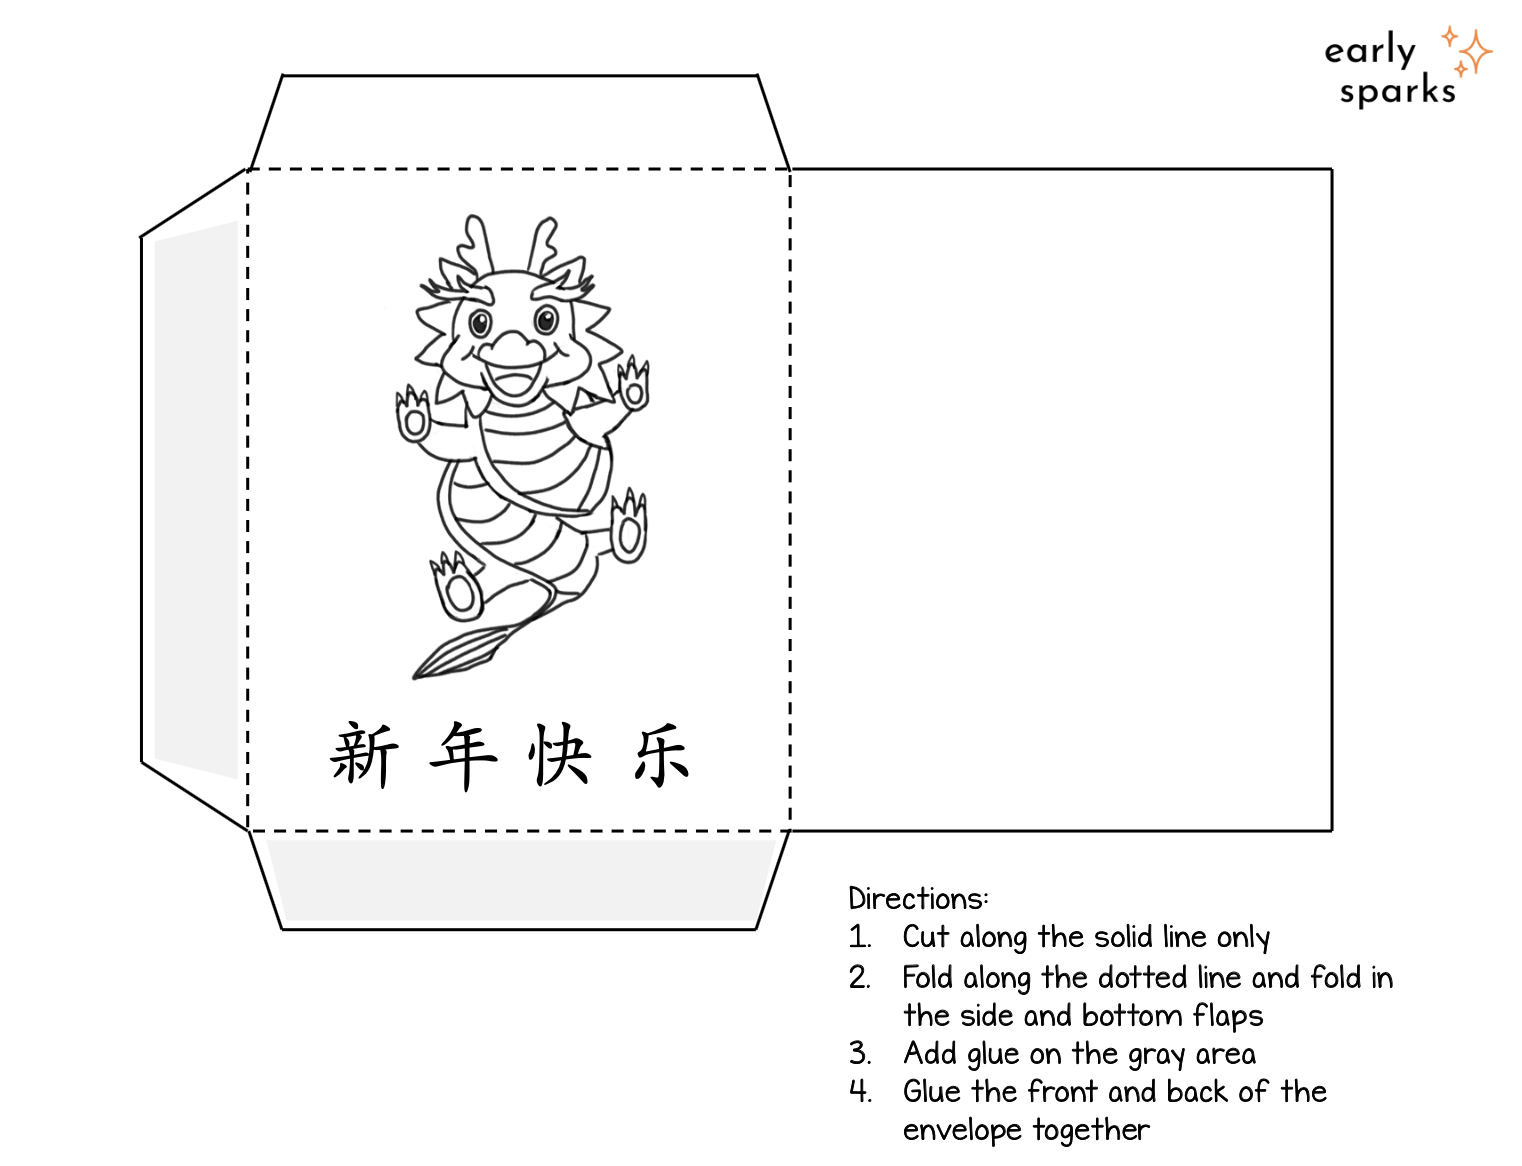 Lucky Red Envelopes Free Printable for Chinese New Year